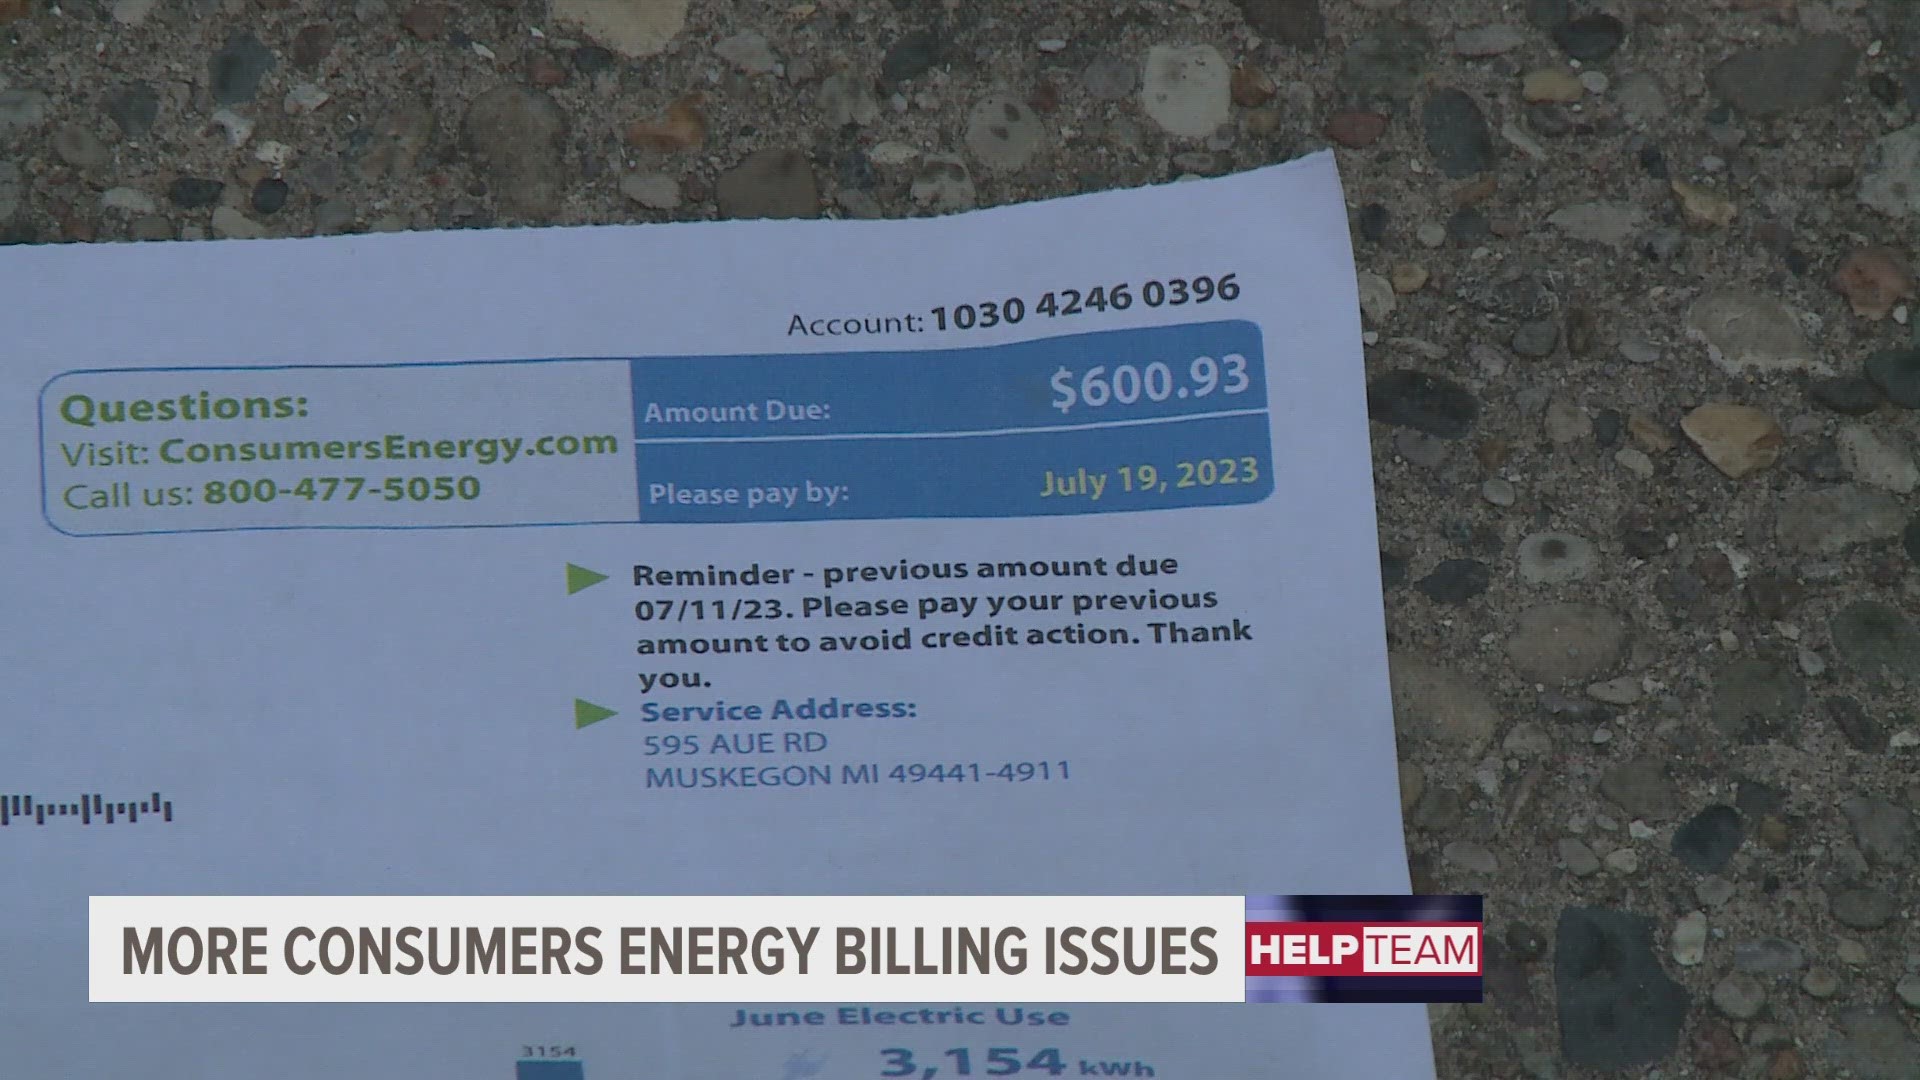 The complaints came amid an ongoing investigation into the utility's billing practices and meter transition by the MPSC.